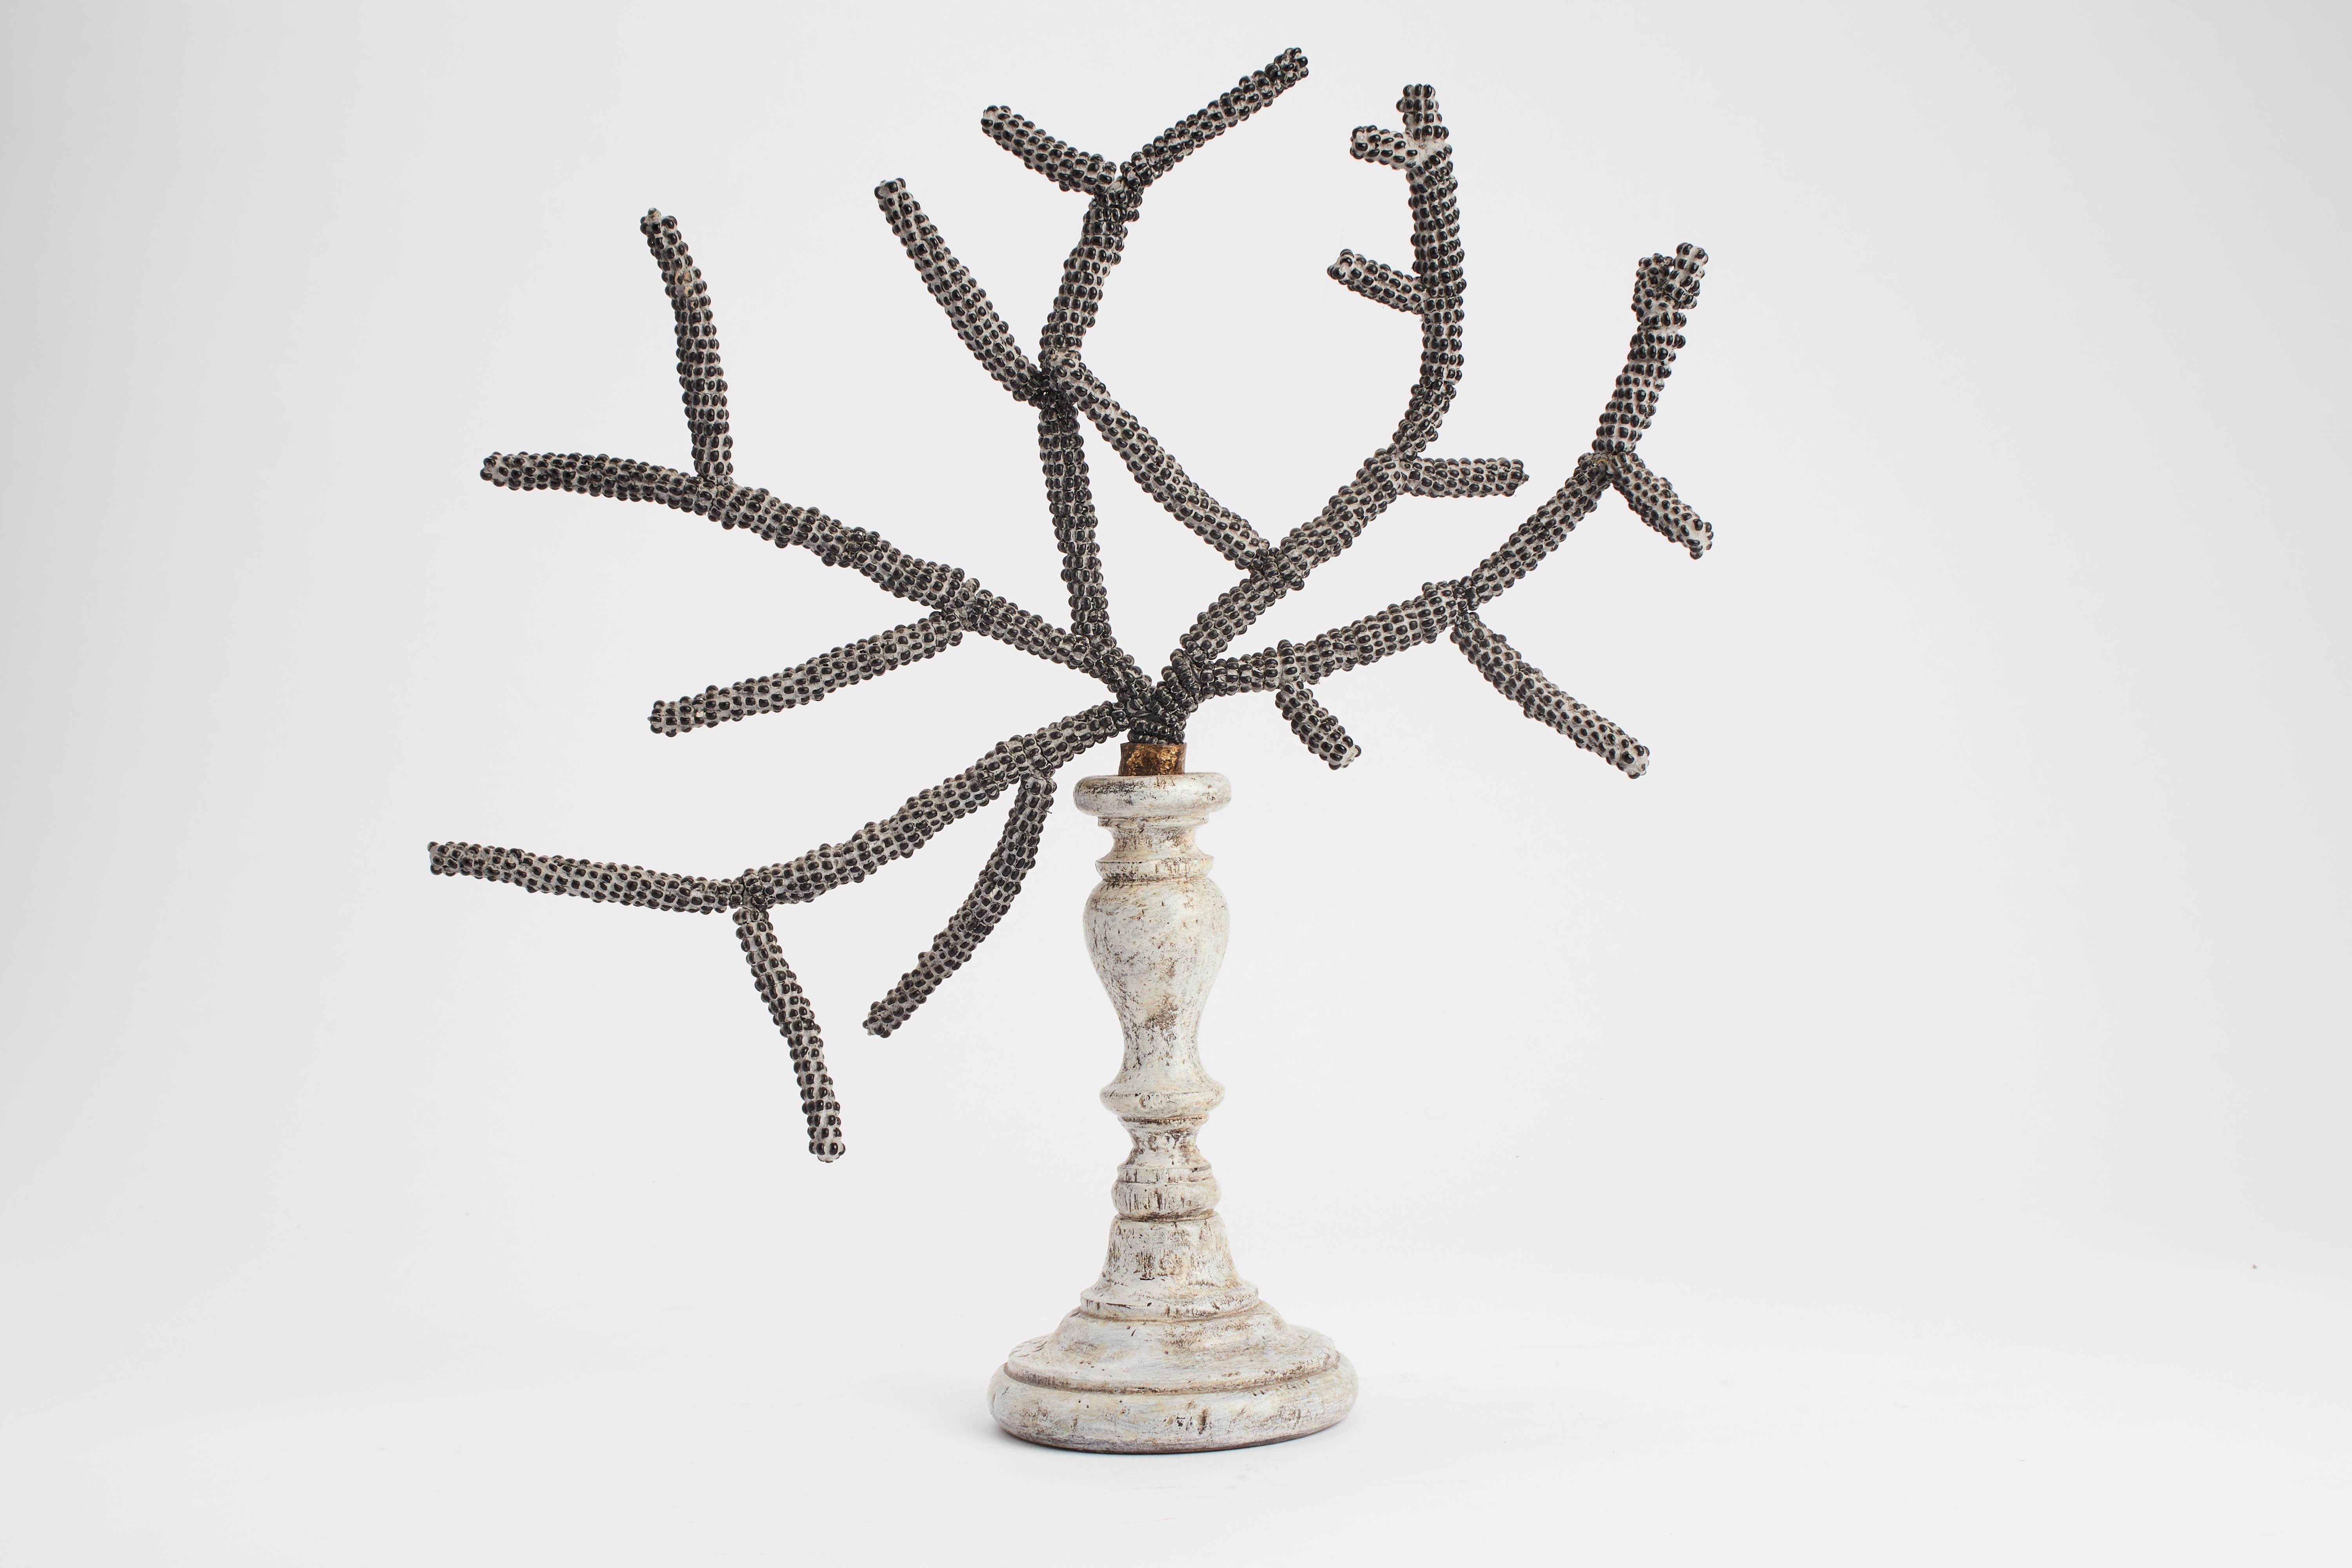 The base is wheel turned wood, white laquered painted. The branch is emulated by a metal rod covered by stucco and Murano glass, black beads. Italy circa 1780.